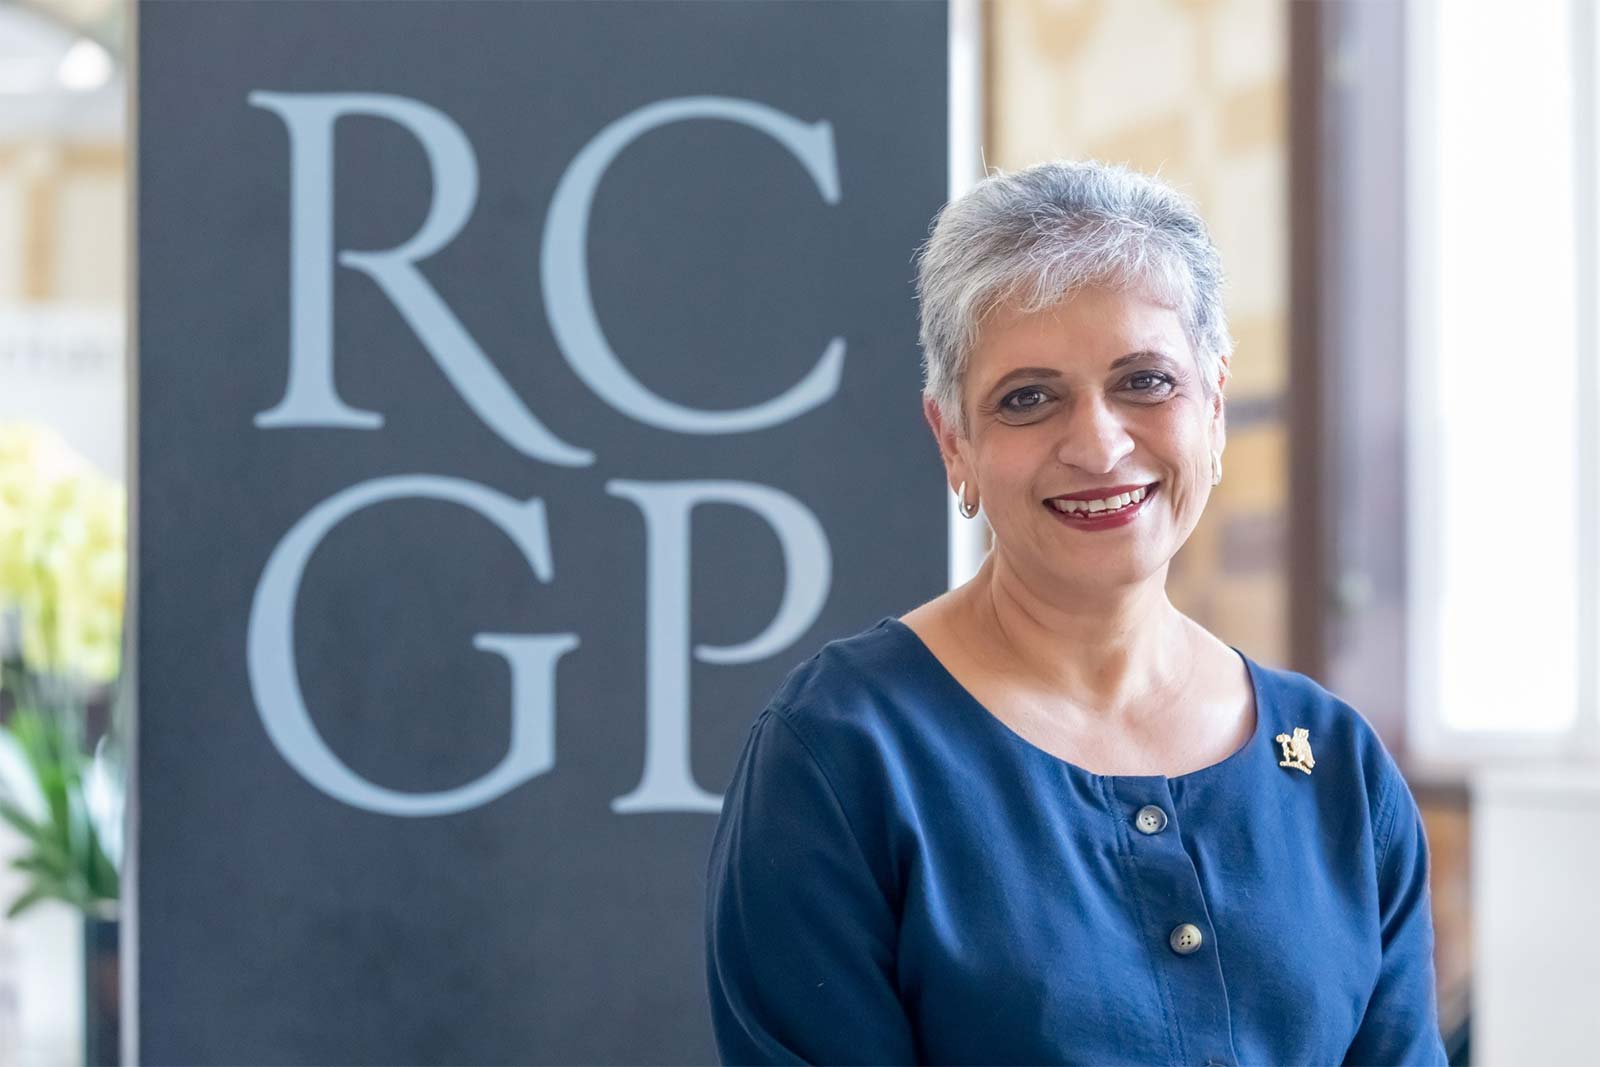 Professor Kamila Hawthorne standing by a large navy blue RCGP sign wearing a blue top.